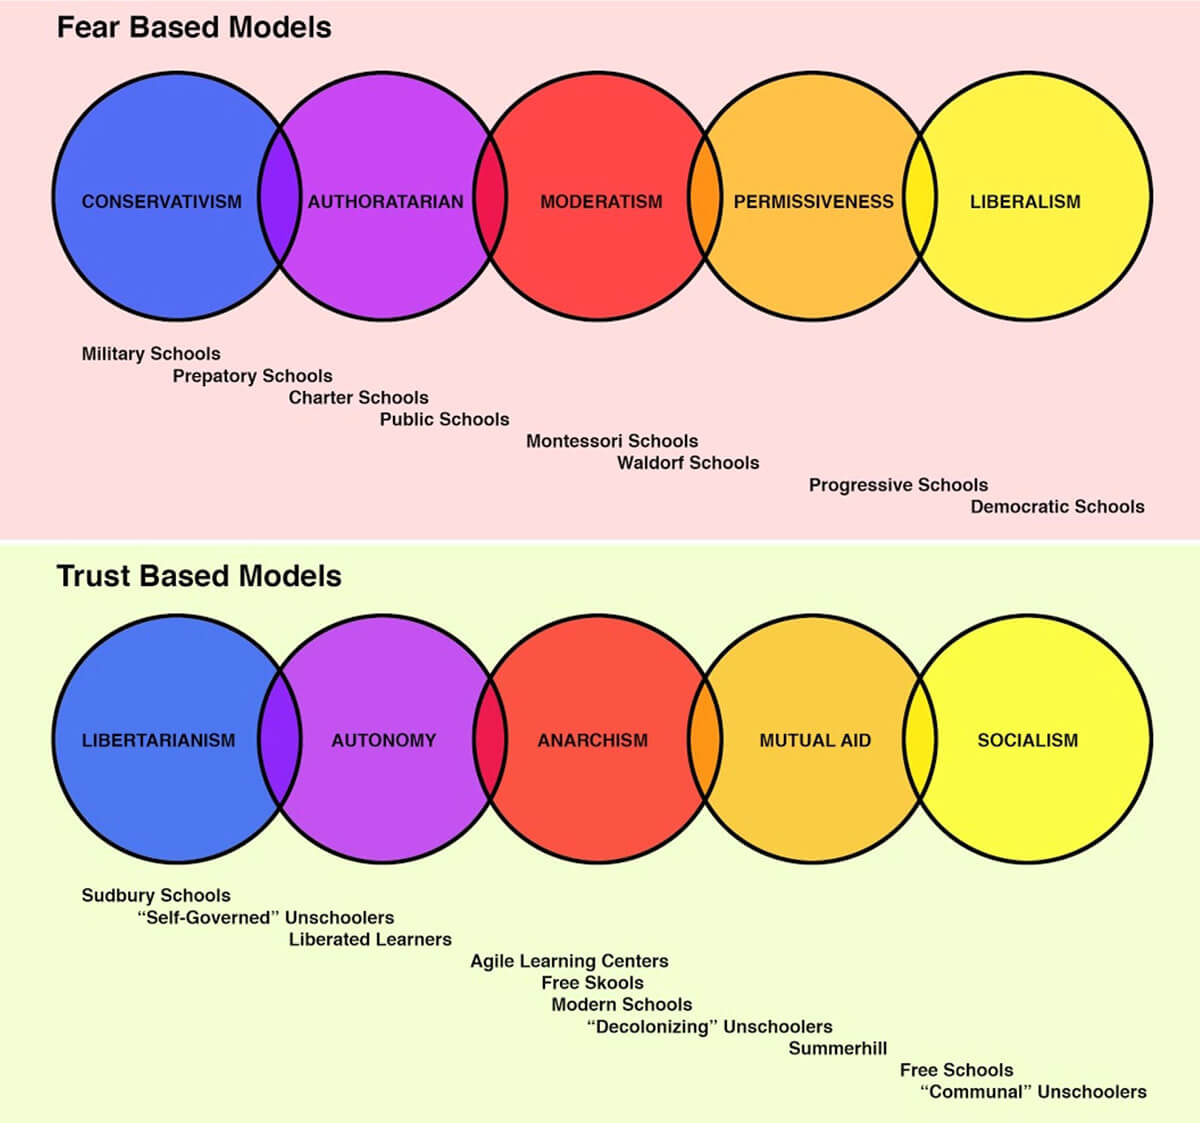 A chart showing fear based and trust based models of education